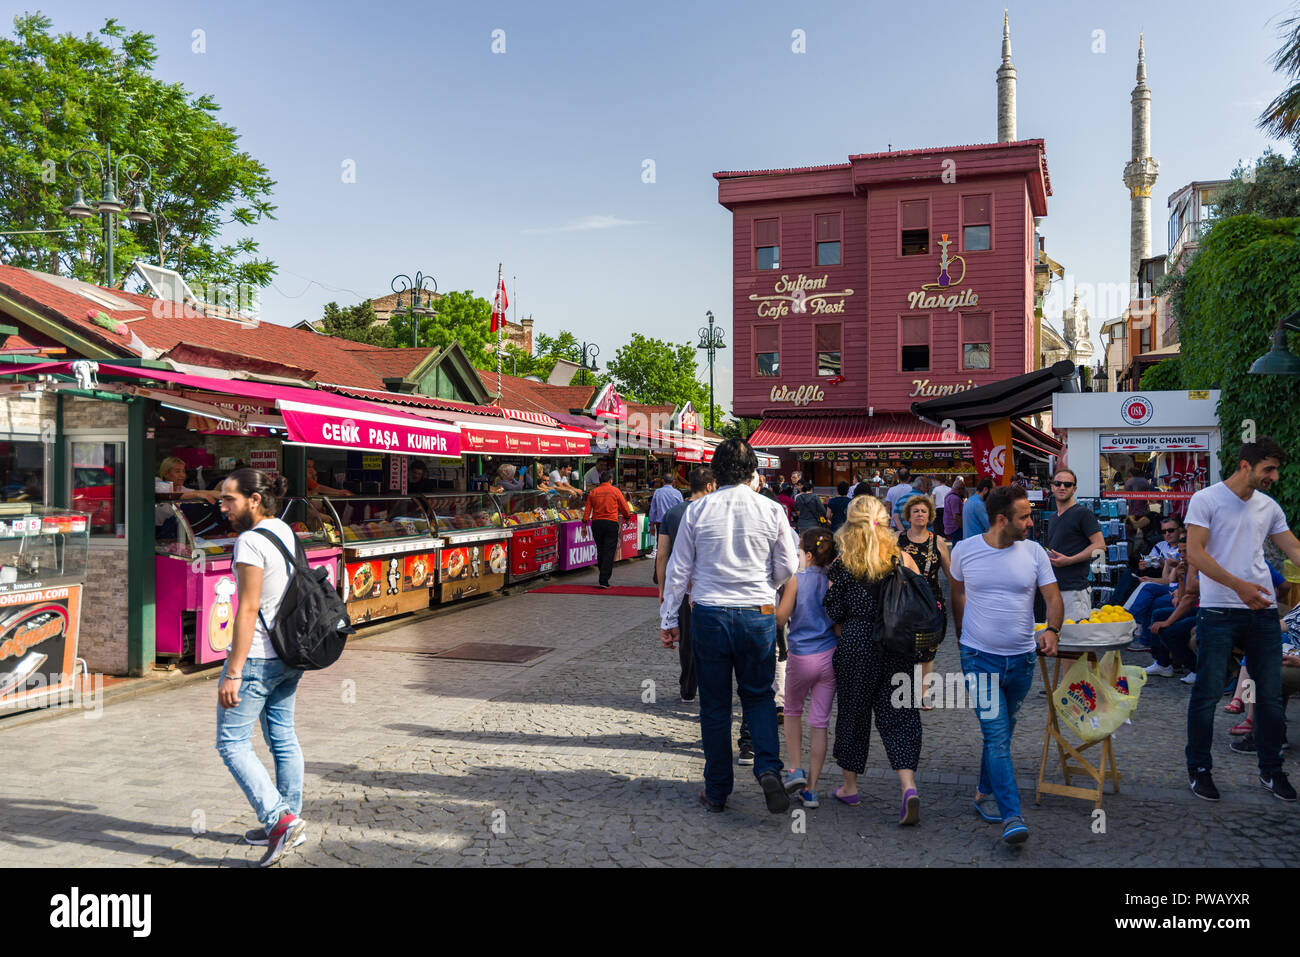 Various stalls selling Kumpir or baked potatoes line a cobbled street as people walk past in the Ortaköy district, Istanbul, Turkey Stock Photo